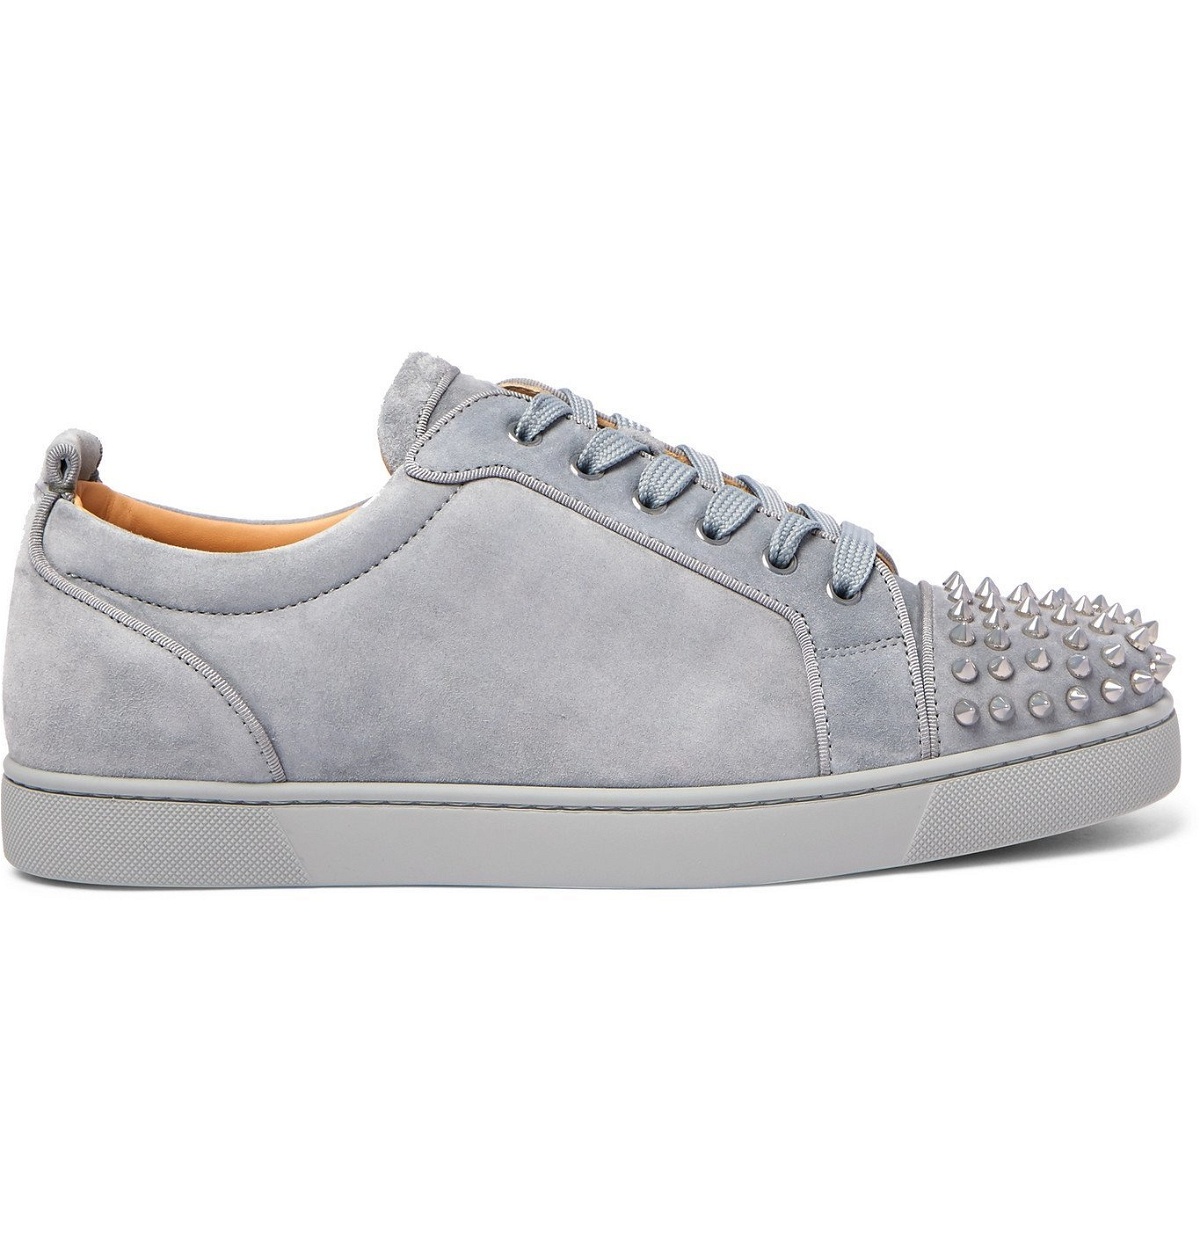 Louis Junior Suede Sneakers in Neutrals - Christian Louboutin